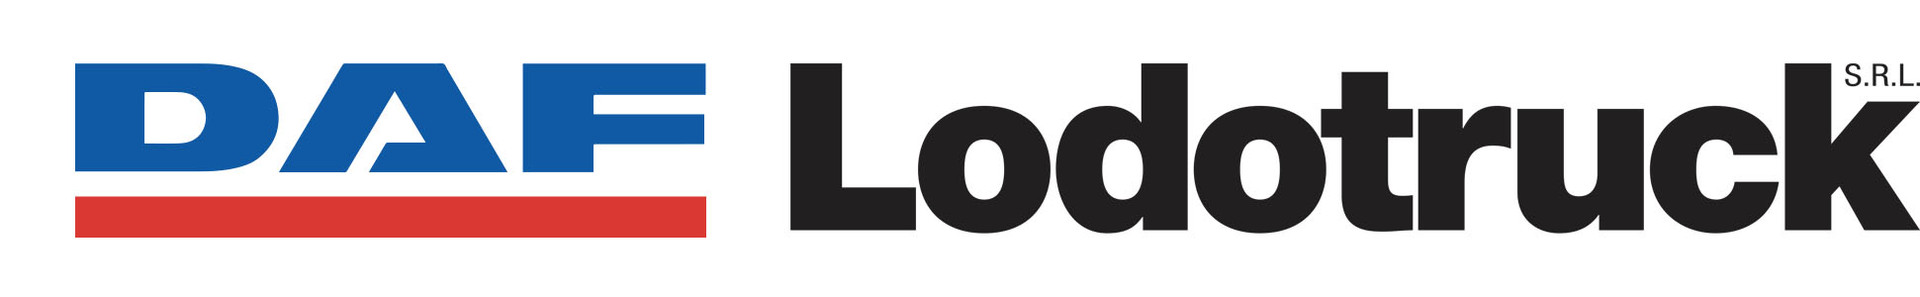 logo-lodotruck-4loghi-official